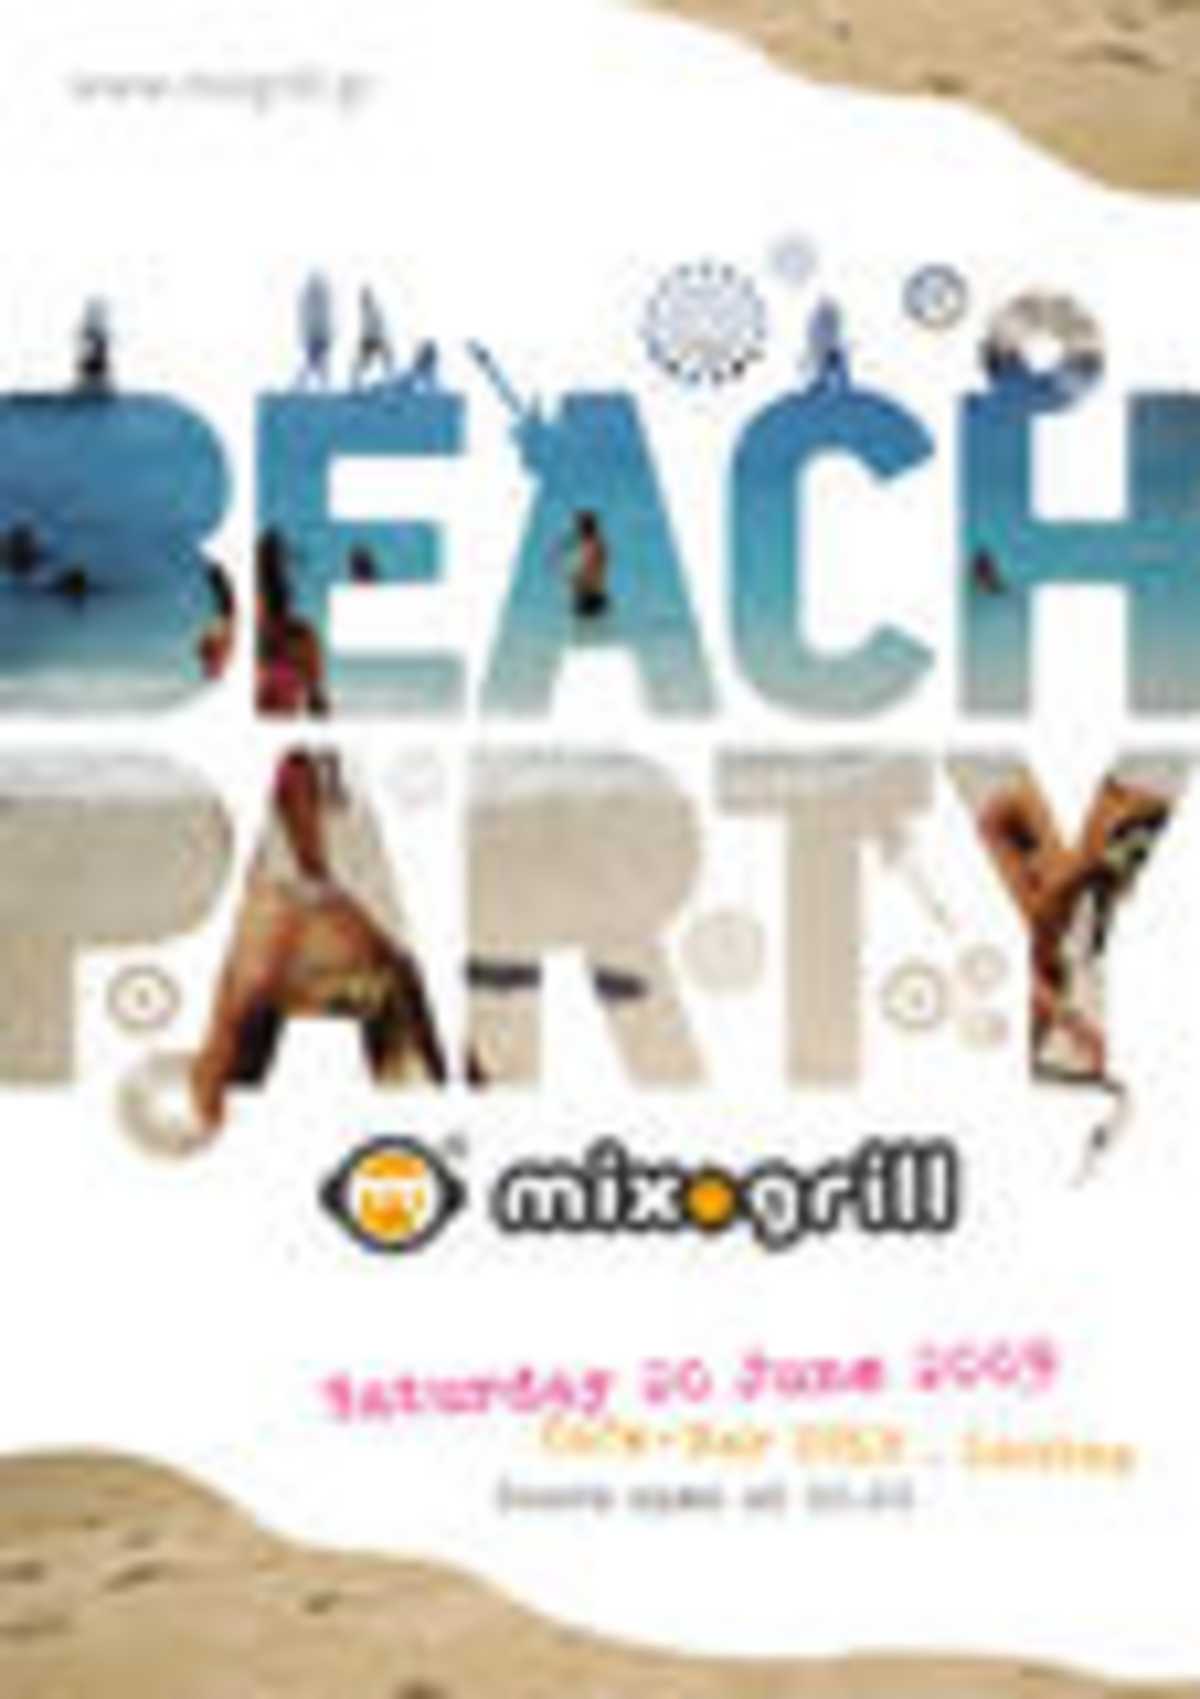 Mix Grill Beach Party 2009